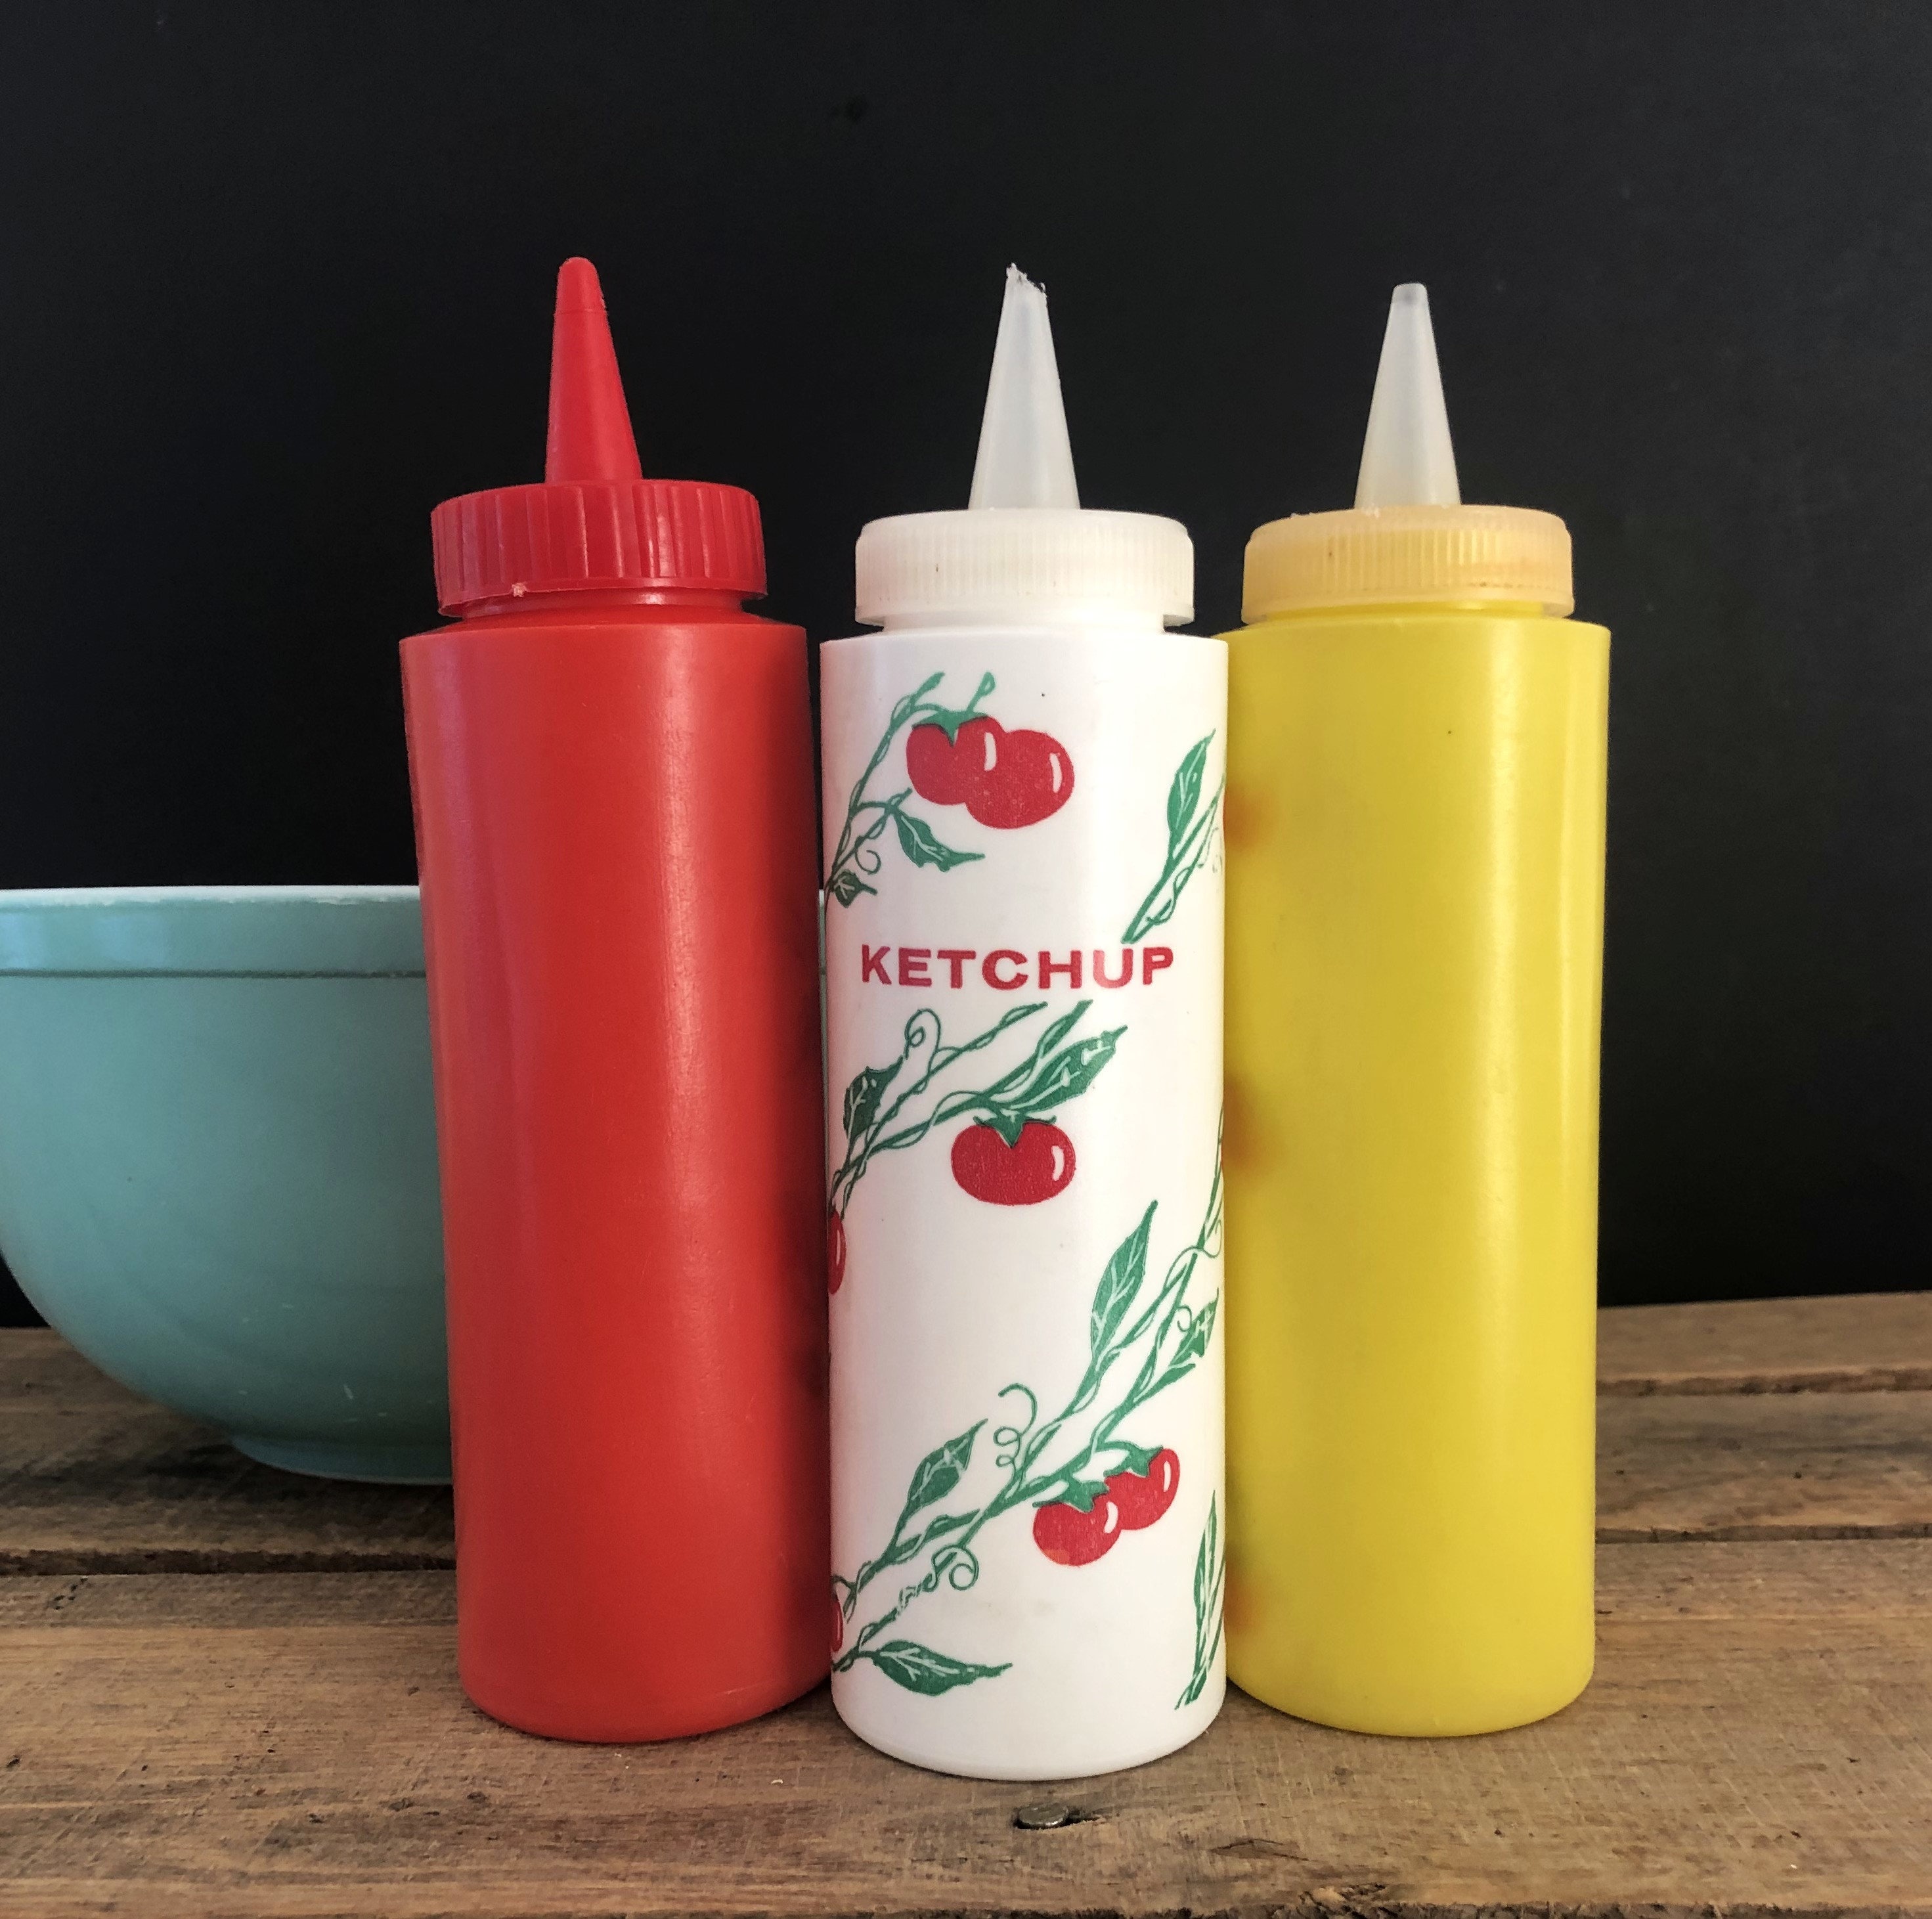 Small Squeeze Bottles For Sauces - Best Price in Singapore - Jan